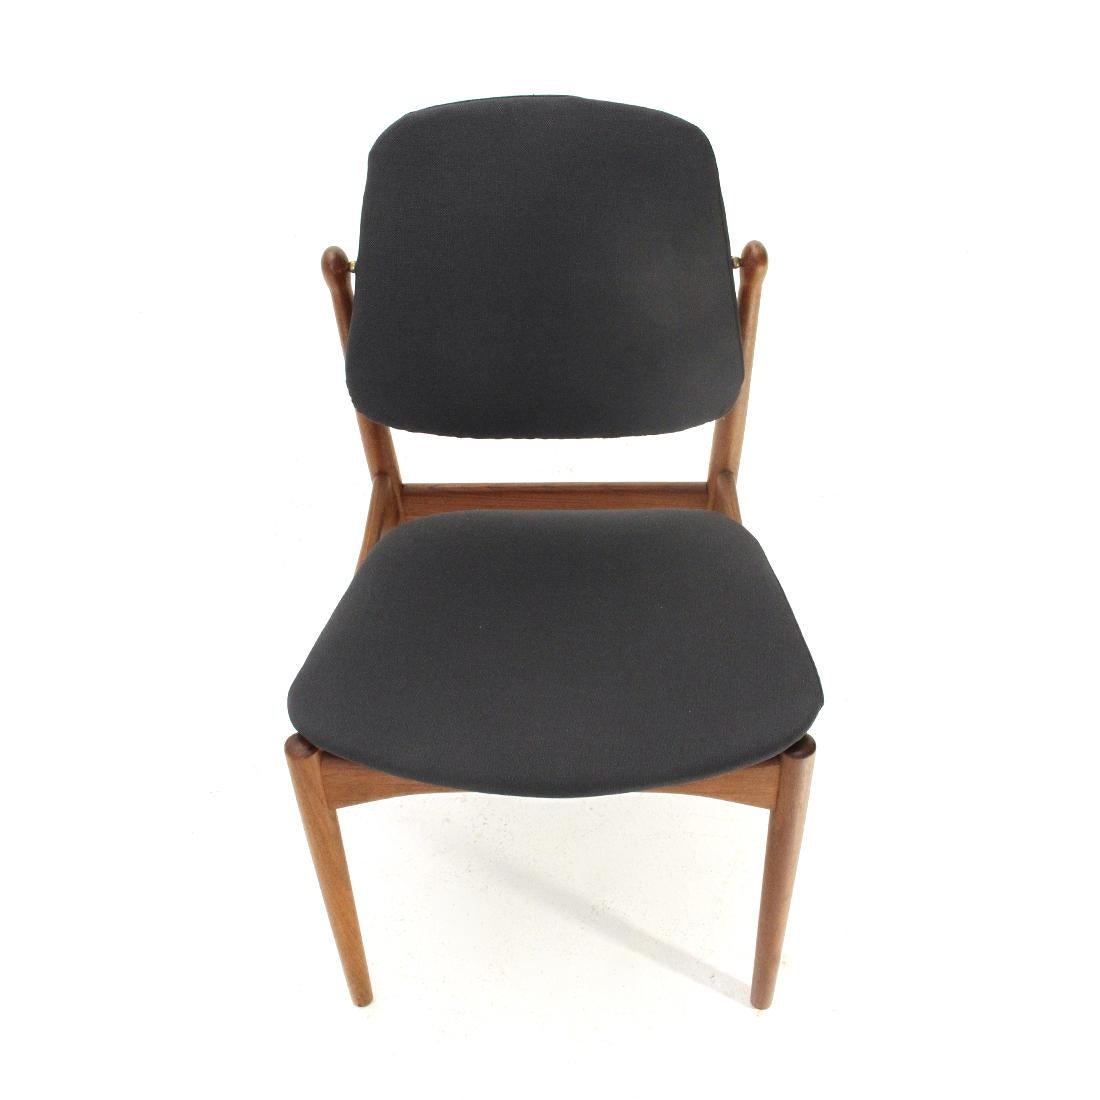 Danish-made chair produced in the 1950s by France and Sons to a design by Arne Vodder.
Solid teak structure.
Seat and back in curved plywood padded and lined with new fabric.
Tilting backrest.
Good general condition, some signs due to normal use